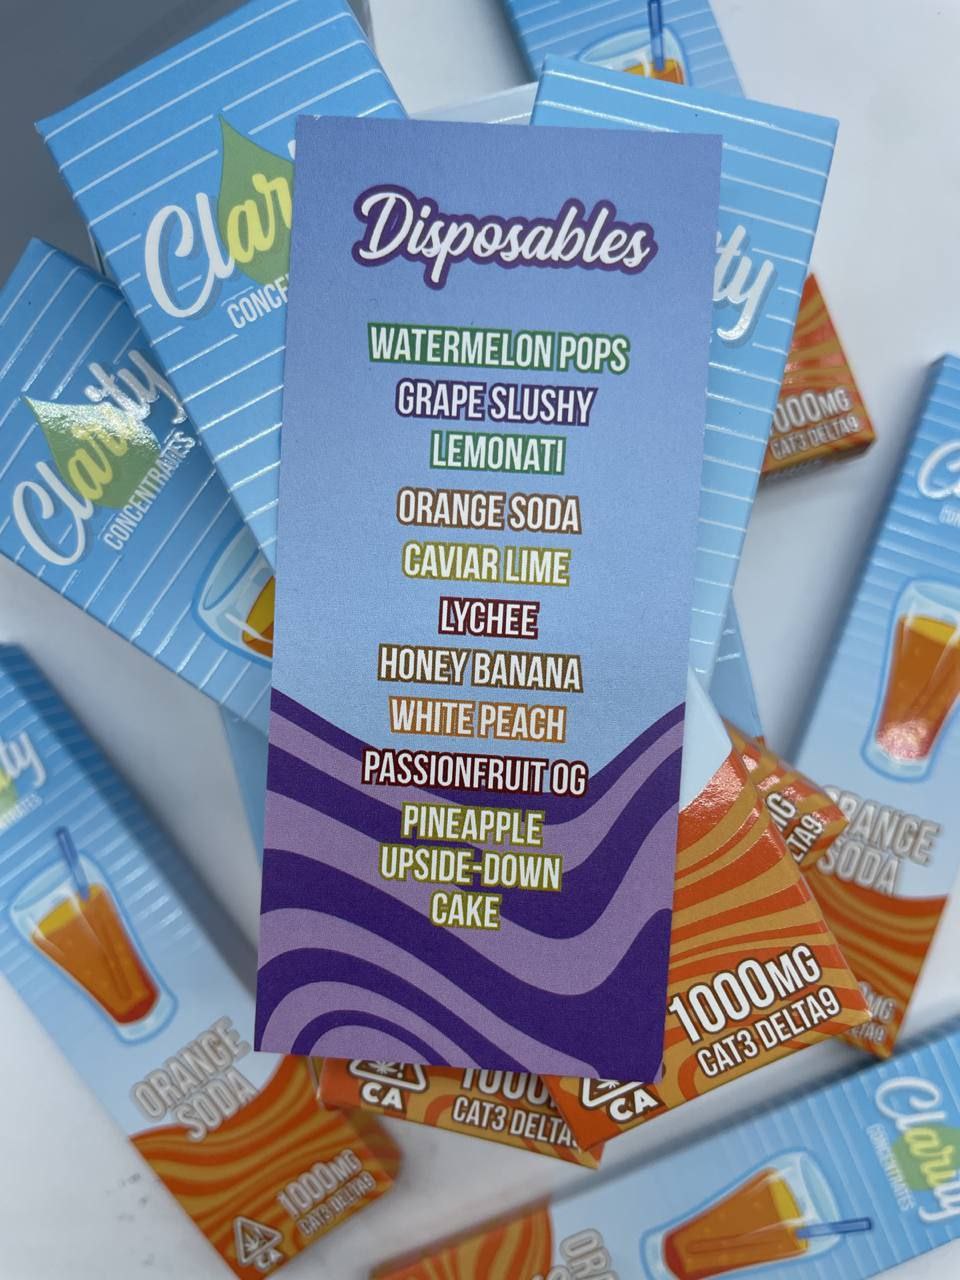 clarity disposables, clarity concentrates disposable, clarity disposable, clarity disposable vape, clarity disposables, clarity concentrates disposable, clarity vape pen, clarity concentrates thc, clarity carts